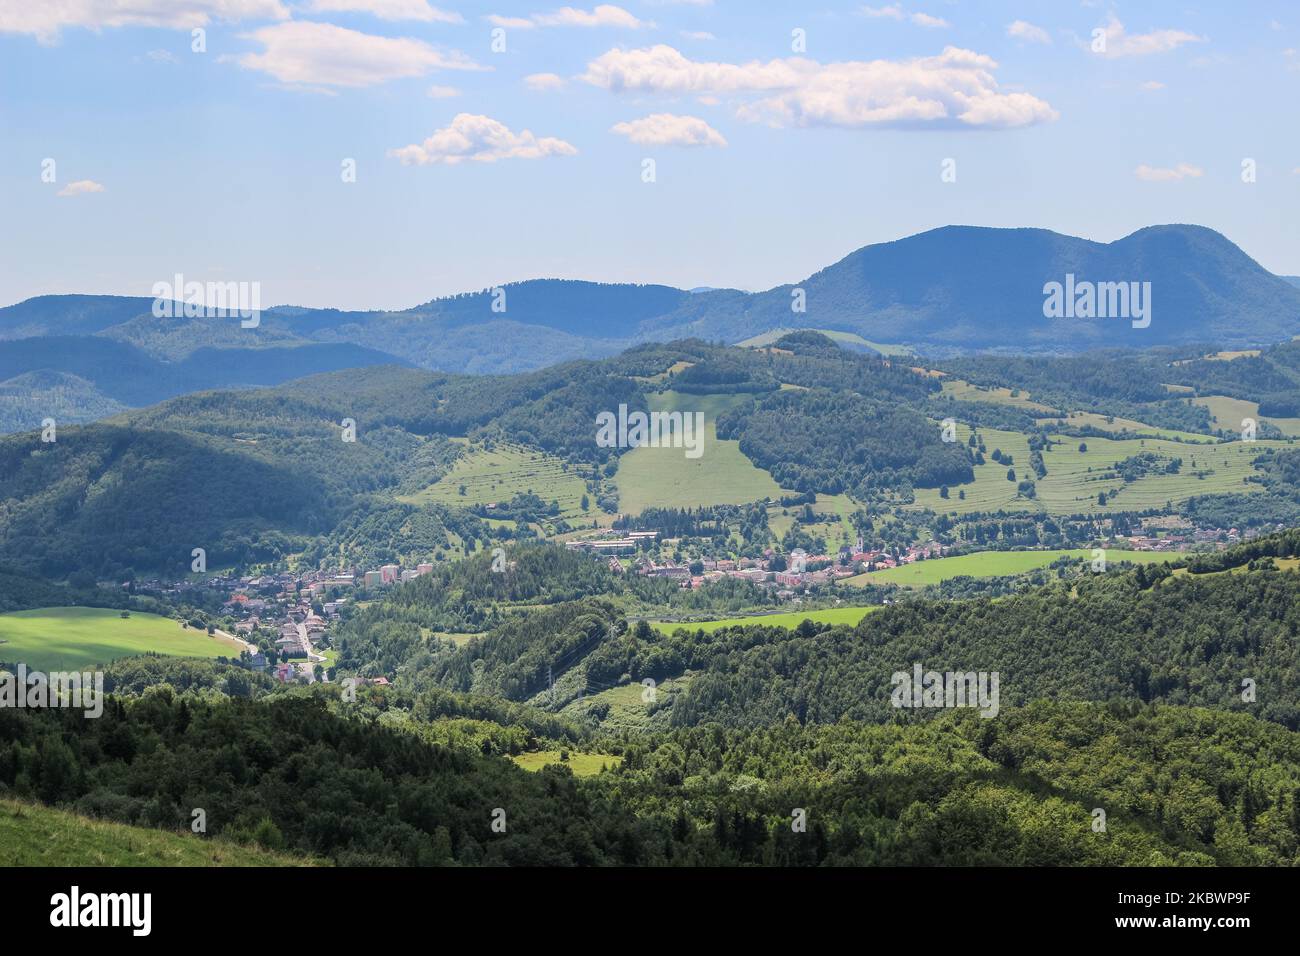 General view of the hills of the Slovak Paradise - a mountain range in eastern Slovakia, part of the Spis-Gemer Karst, a part of the Slovak Ore Mountains, a major subdivision of the Western Carpathians in Dedinky, Slovakia on 1 August 2020 (Photo by Michal Fludra/NurPhoto) Stock Photo